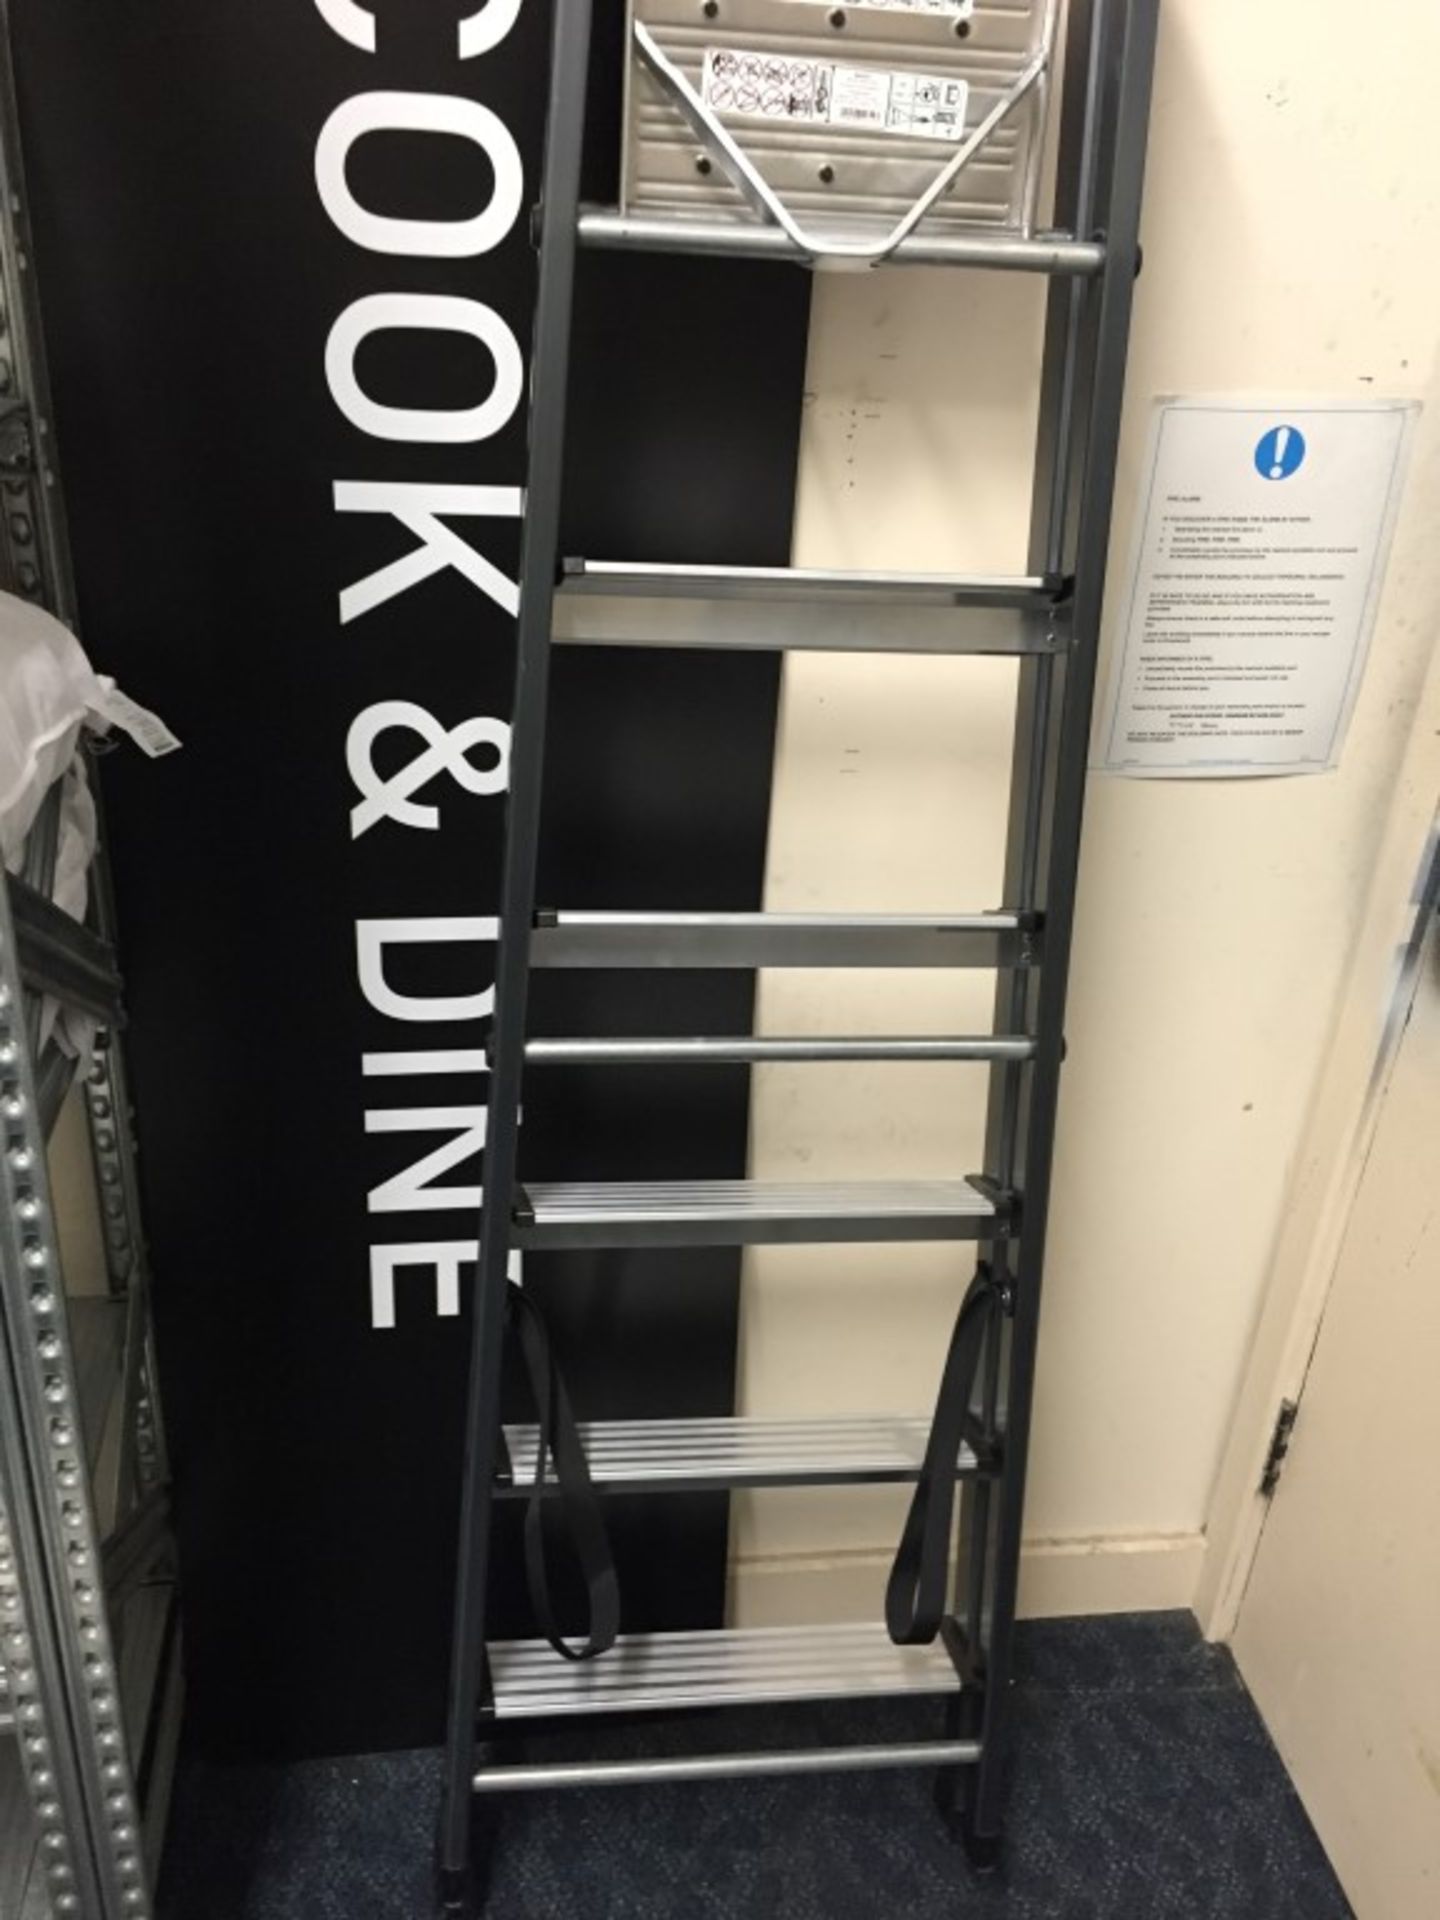 1 x Krause 6 Step Ladders, Condition looks as new - Ref: CF014 - CL127 - Location: Farnborough, - Image 9 of 9